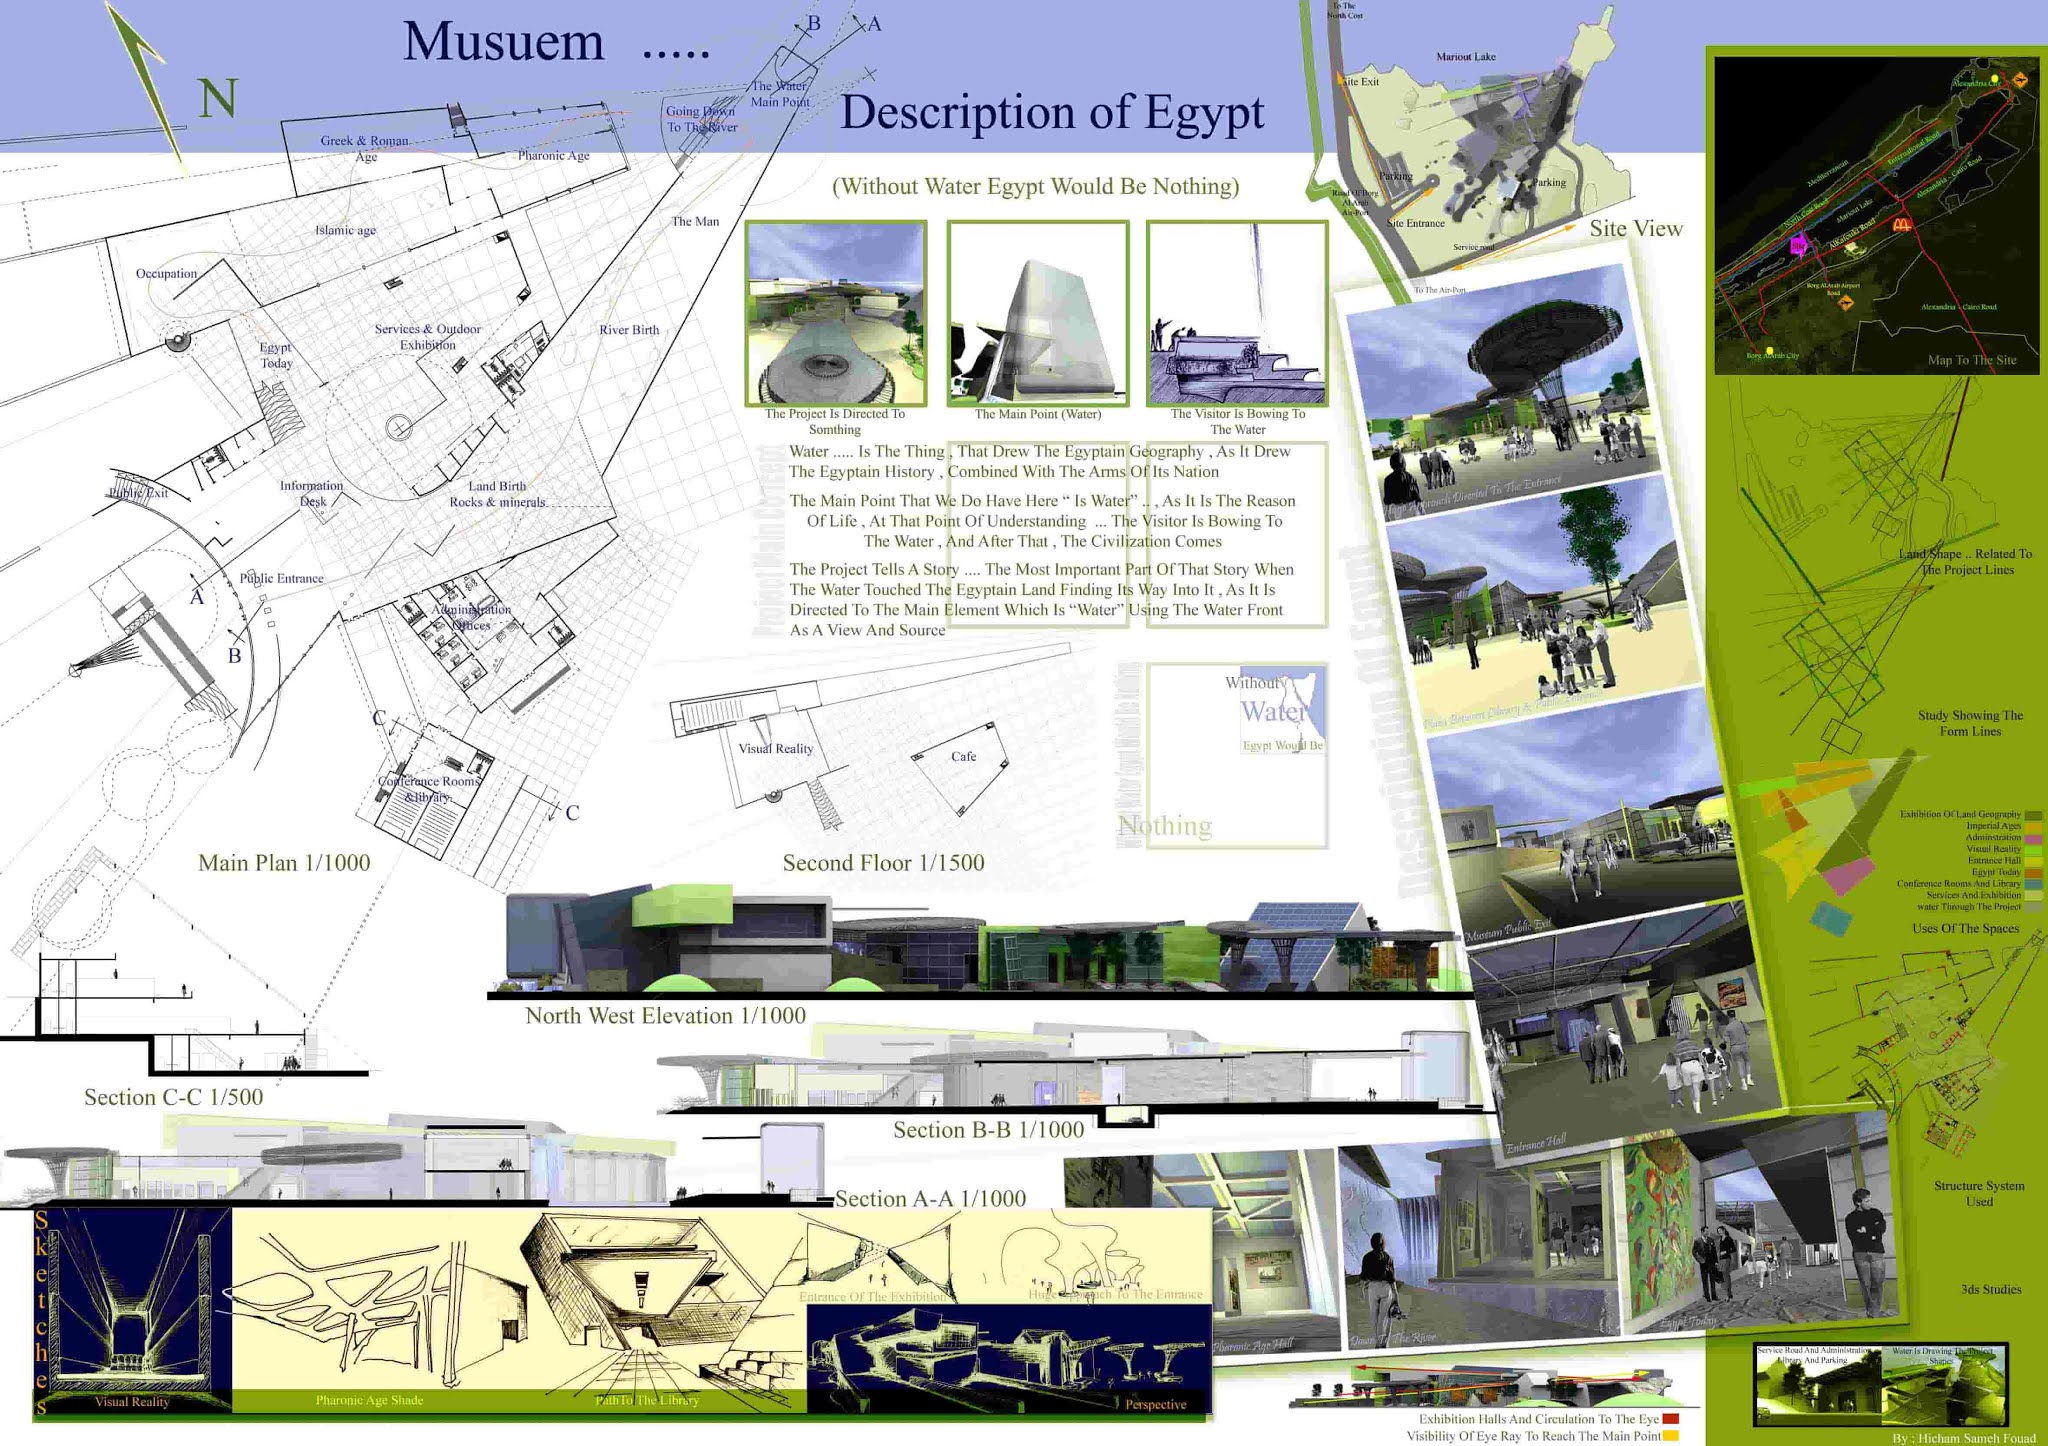 modern-art-museum,panorama-alexendrya-museum,Museum-of-nature-sustainable,submurgd-archrology-museum,plants-museum,plants-museum-project,war-memories-museum,museum-development-of-technology-industry,air-force-museum,arabic-calligraphy-museum,fine-arts-museum,war-&-piece-panorama-of-arab-isreal-eternity-struggle-in-ismaalia,panorama-of-war-and-peace,sinai-military-museum,fossil-museum,fossil-museum-un-garumn-lake-fayounm,museum-of-egypt,egypt-museum,egyptian-museum,natural-history-museum,History-of-Medicine-Museum,Museum-Thesis-Sheet-Composition-Ideas,War-Memorial-Museum,Terrorism-Agint-Museum,Science-&-Technology-Museum,NANO-Technology-Museum,Museum-&-Research